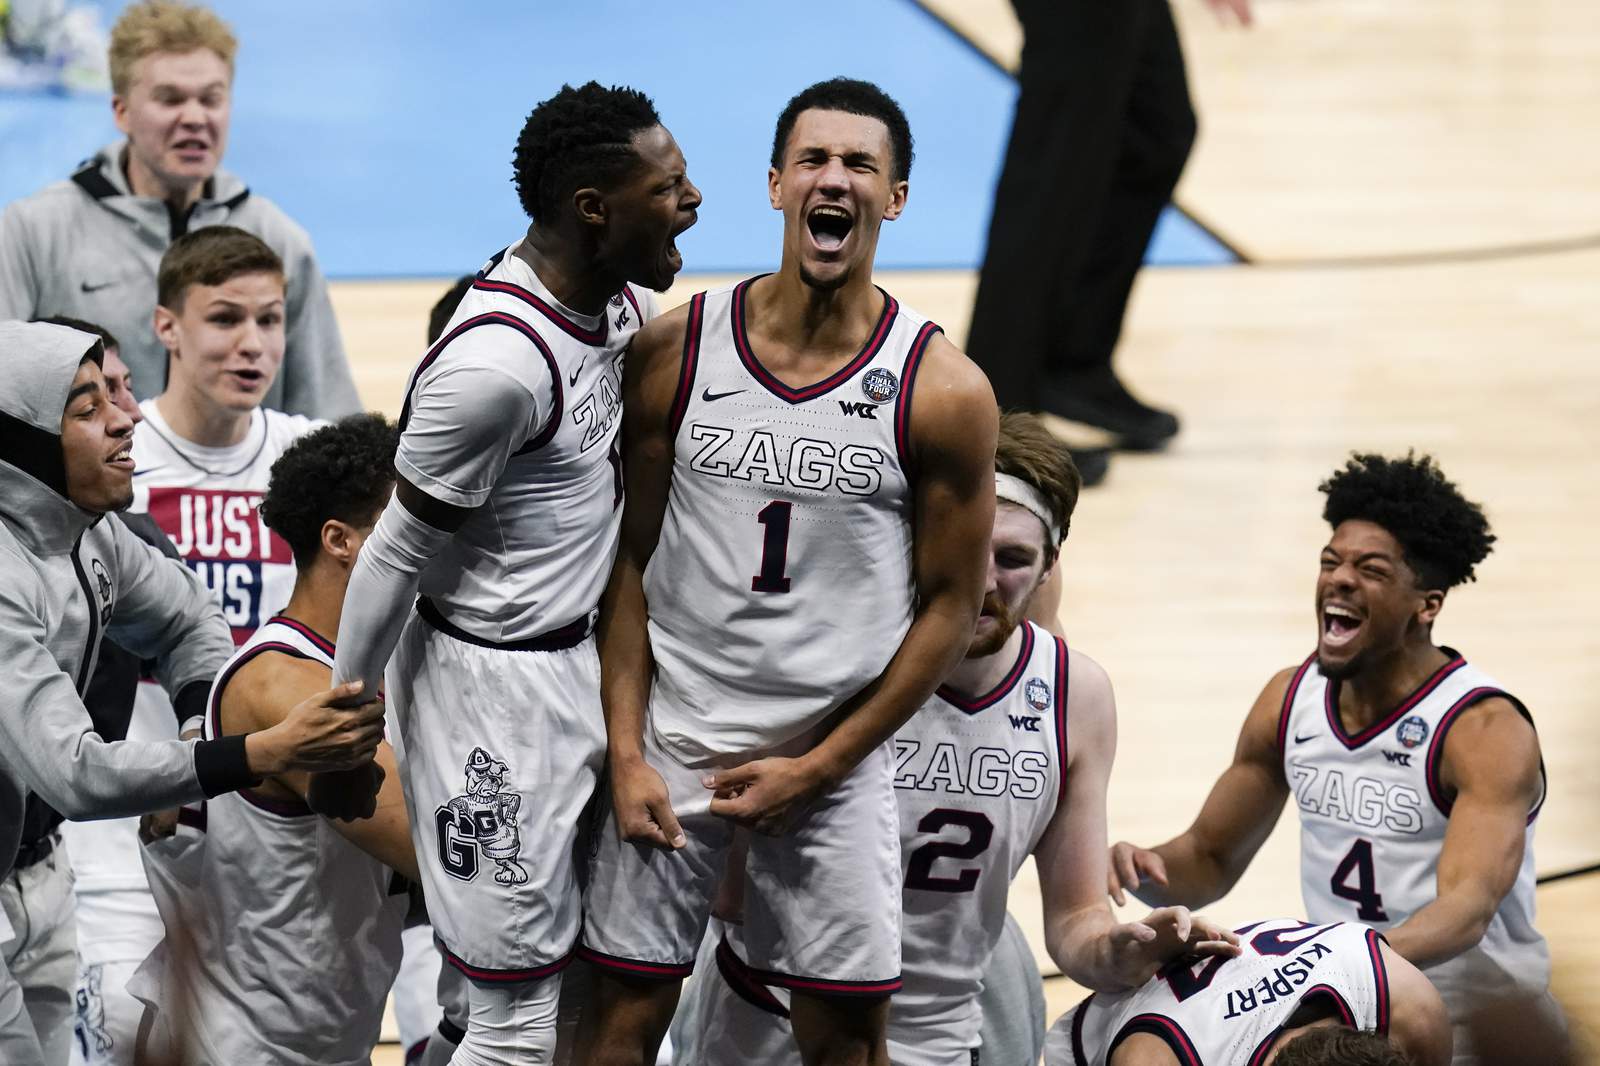 West has been the best in this year's NCAA Tournament